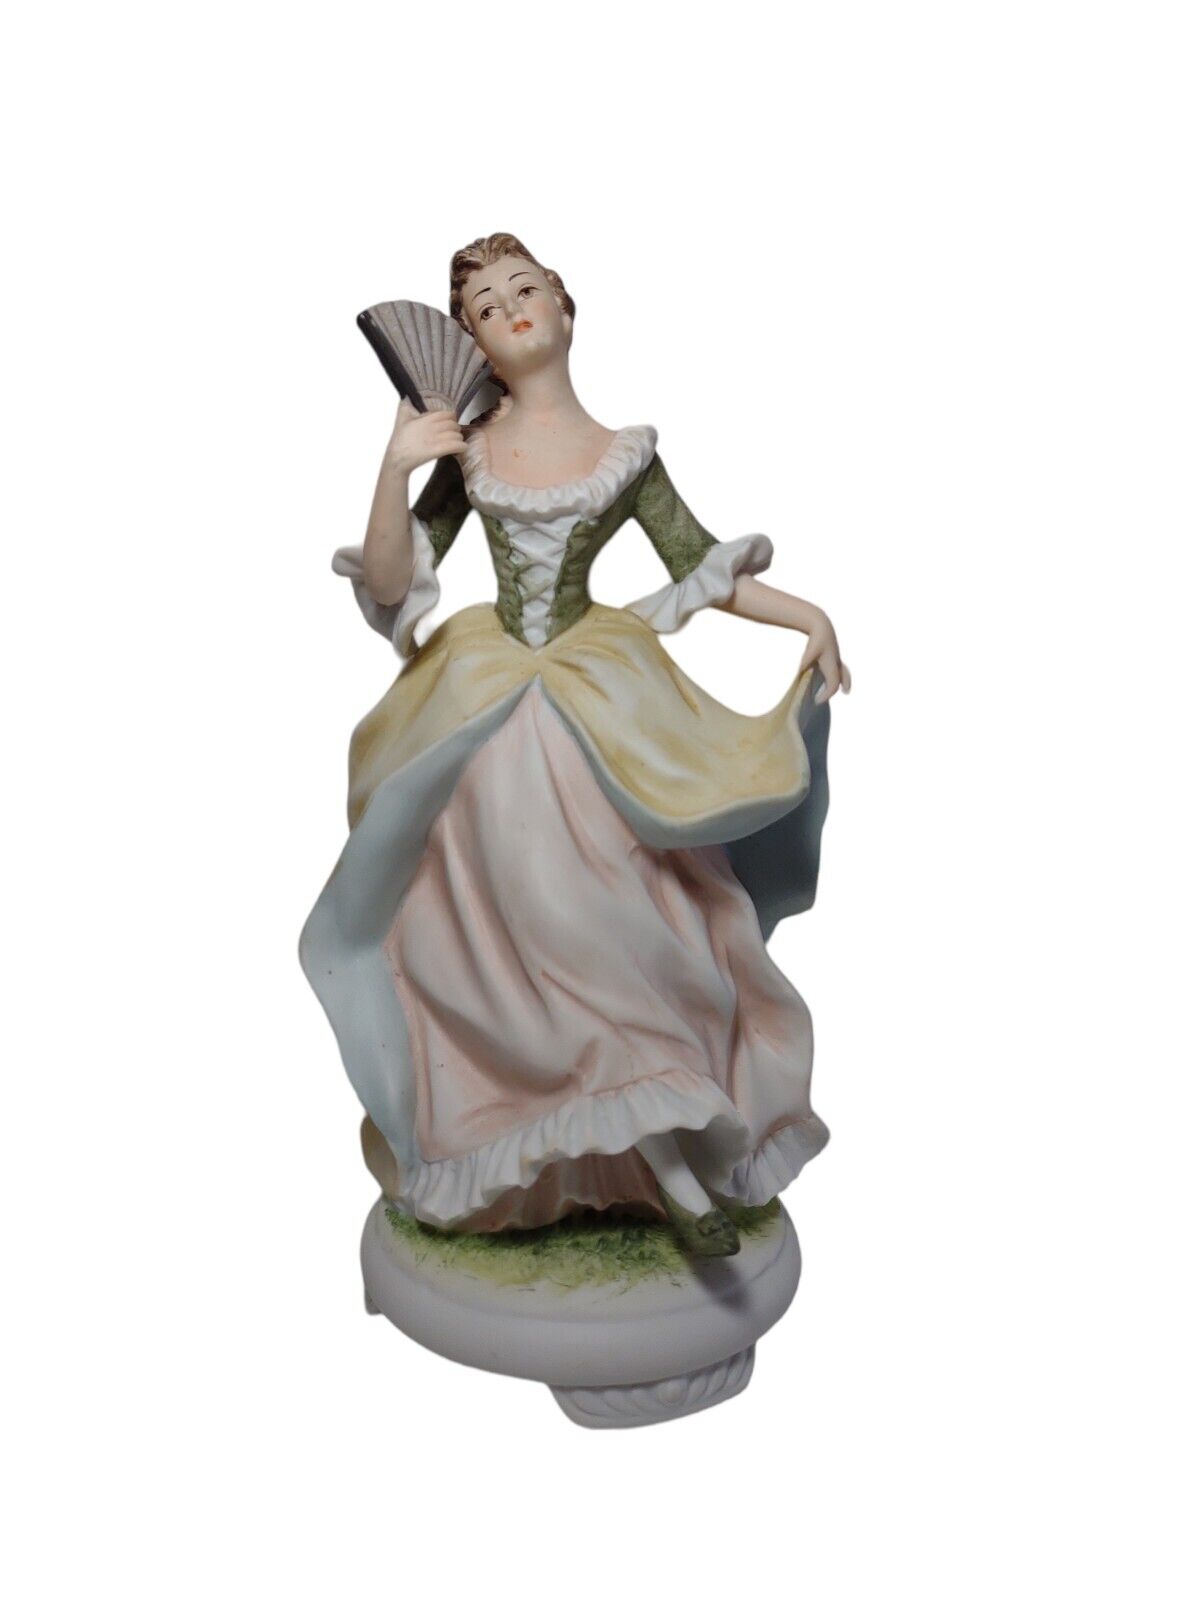 Vntg. Lefton Beautiful Figurine of a lady with fan Porcelain - 8\